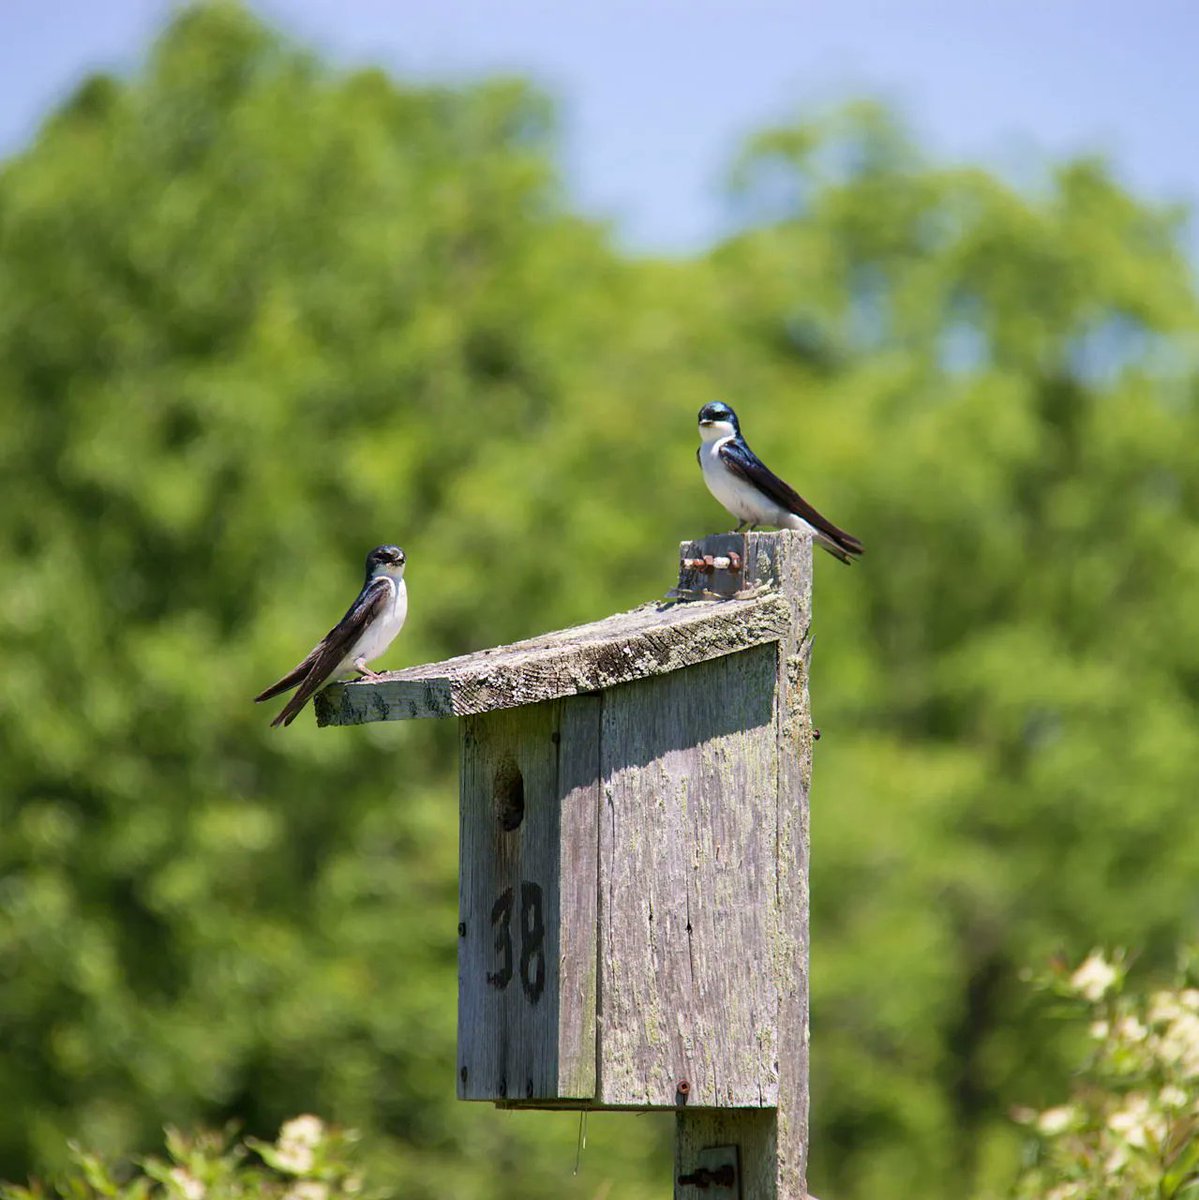 Habitat loss and fragmentation is a major threat to #biodiversity, as highlighted by #HamOnt draft Biodiversity Action Plan (BAP)! At home bird boxes and planting native species are ways to help combat habitat loss. Learn more and share your thoughts at: engage.hamilton.ca/biodiversitypl…